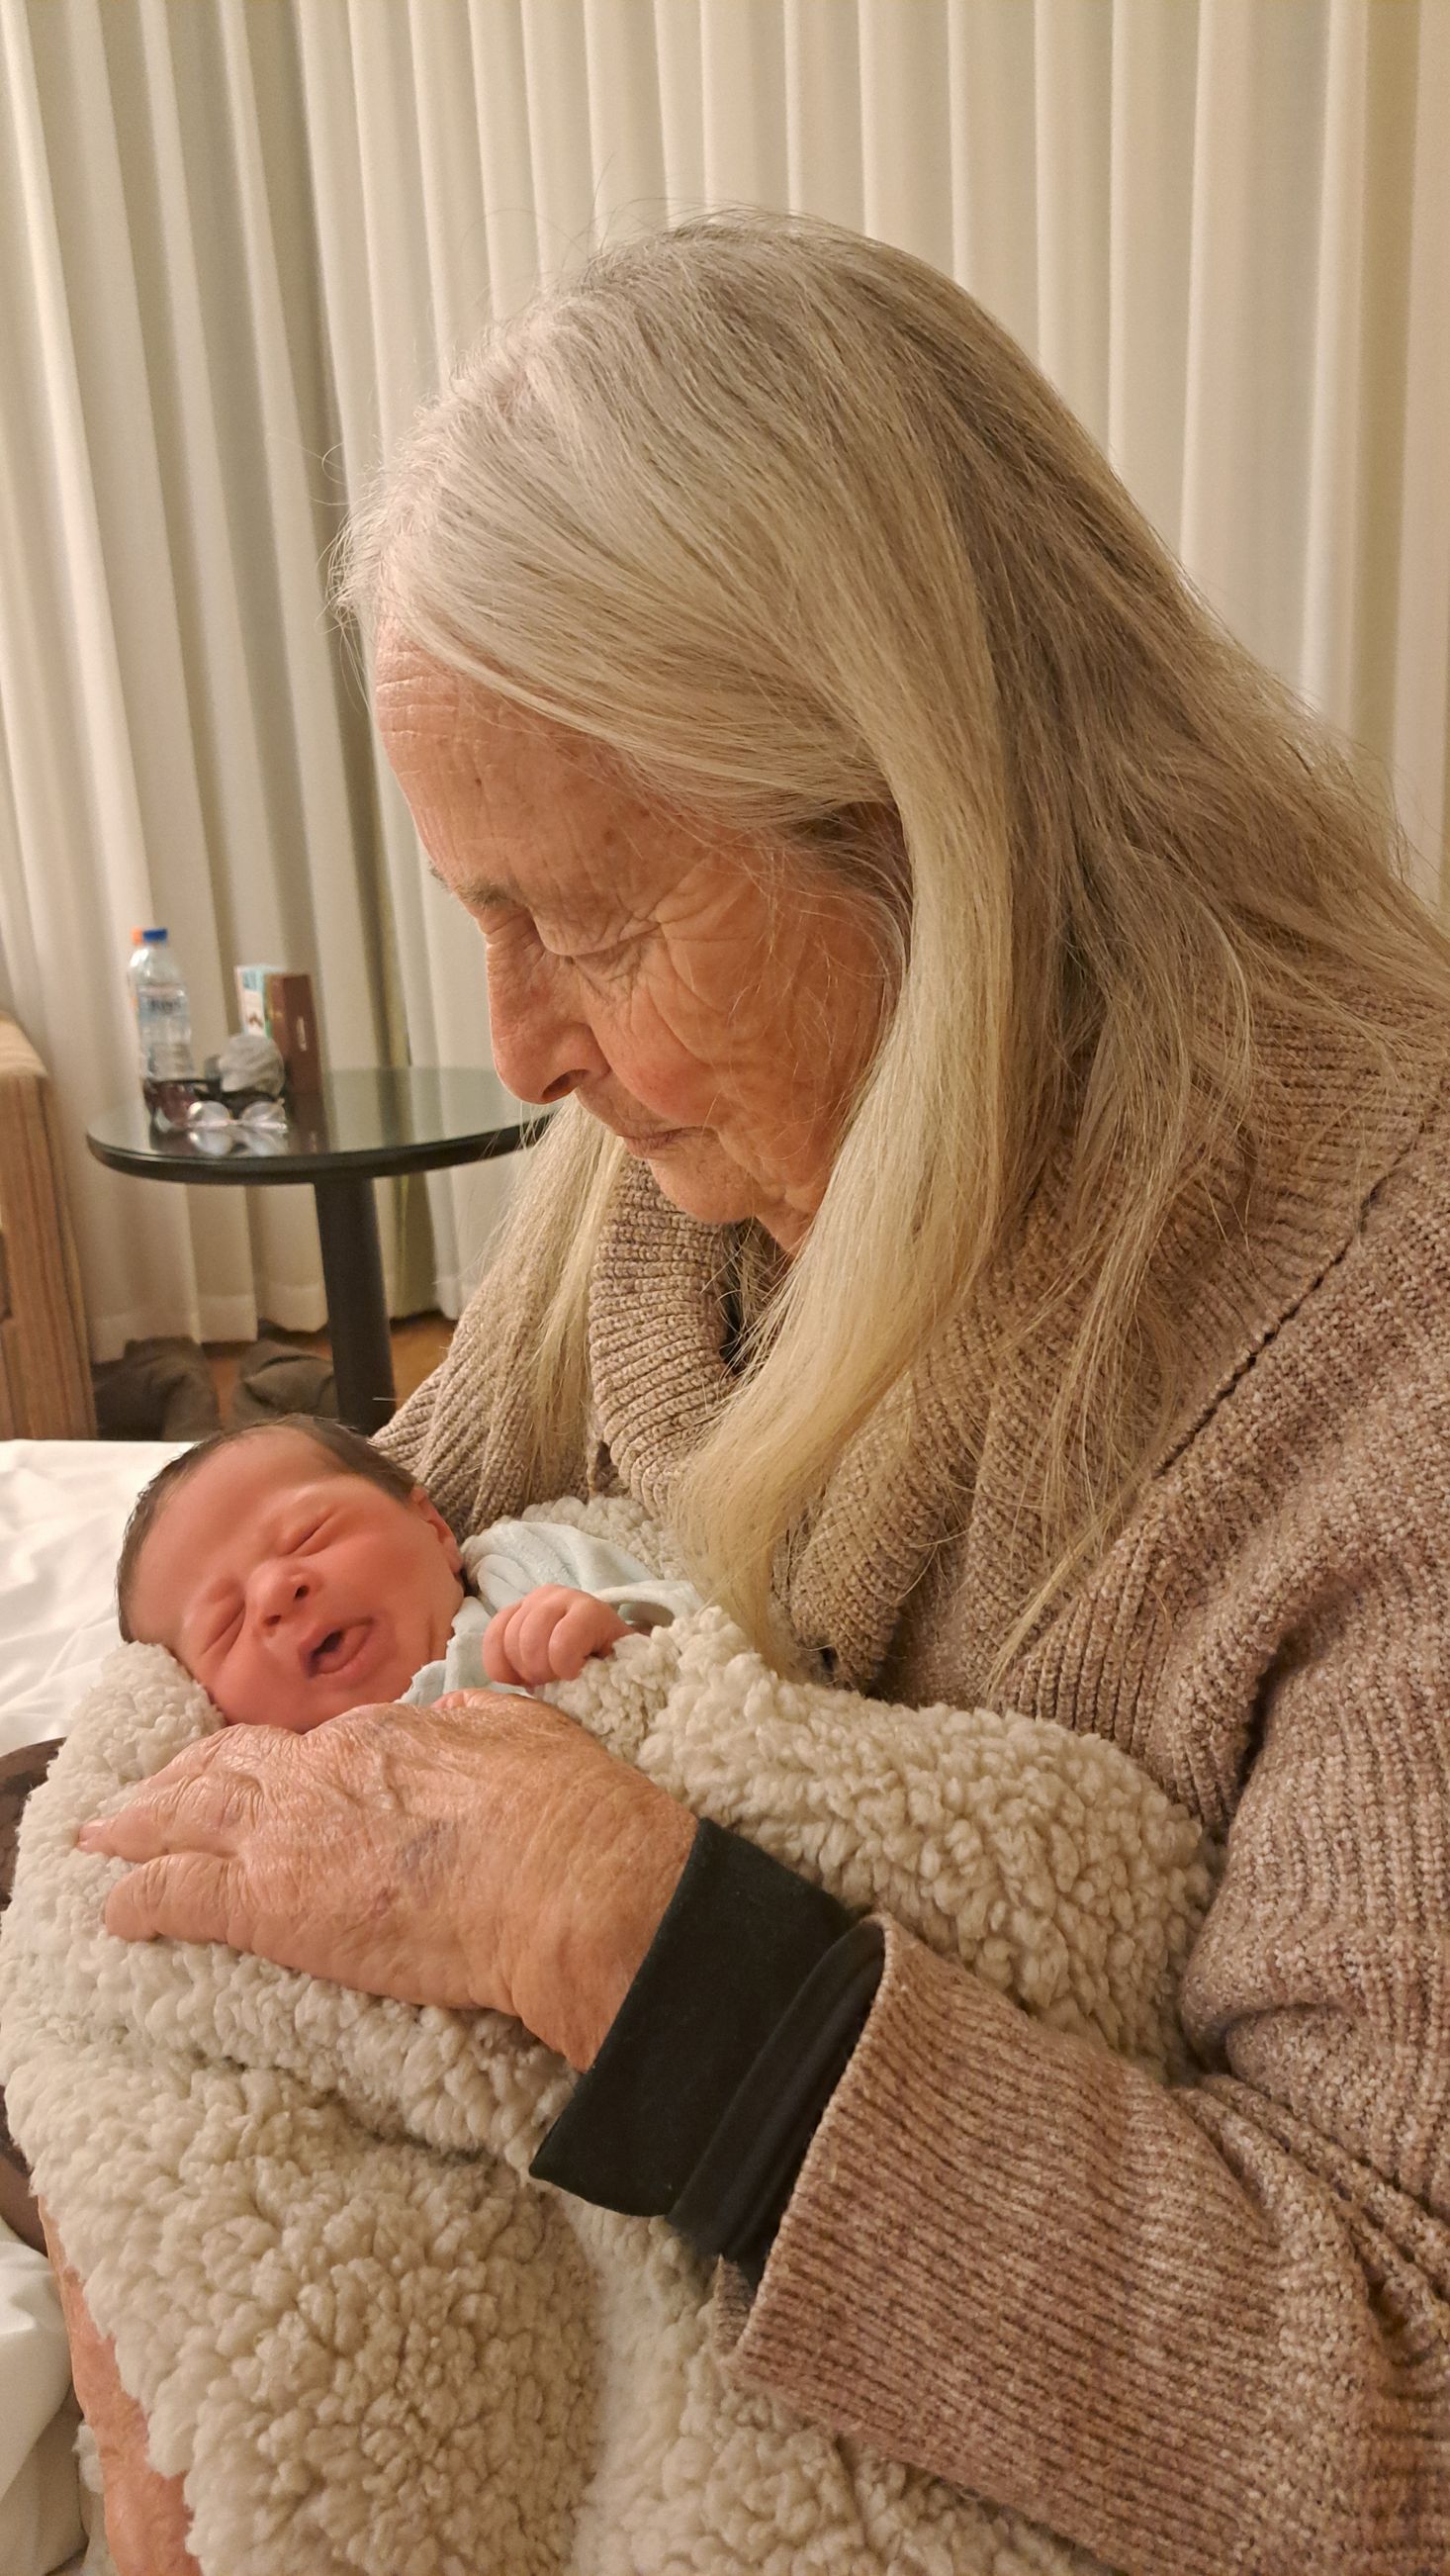 White-haired woman holding a newborn baby. Grandmother with a new grandchild